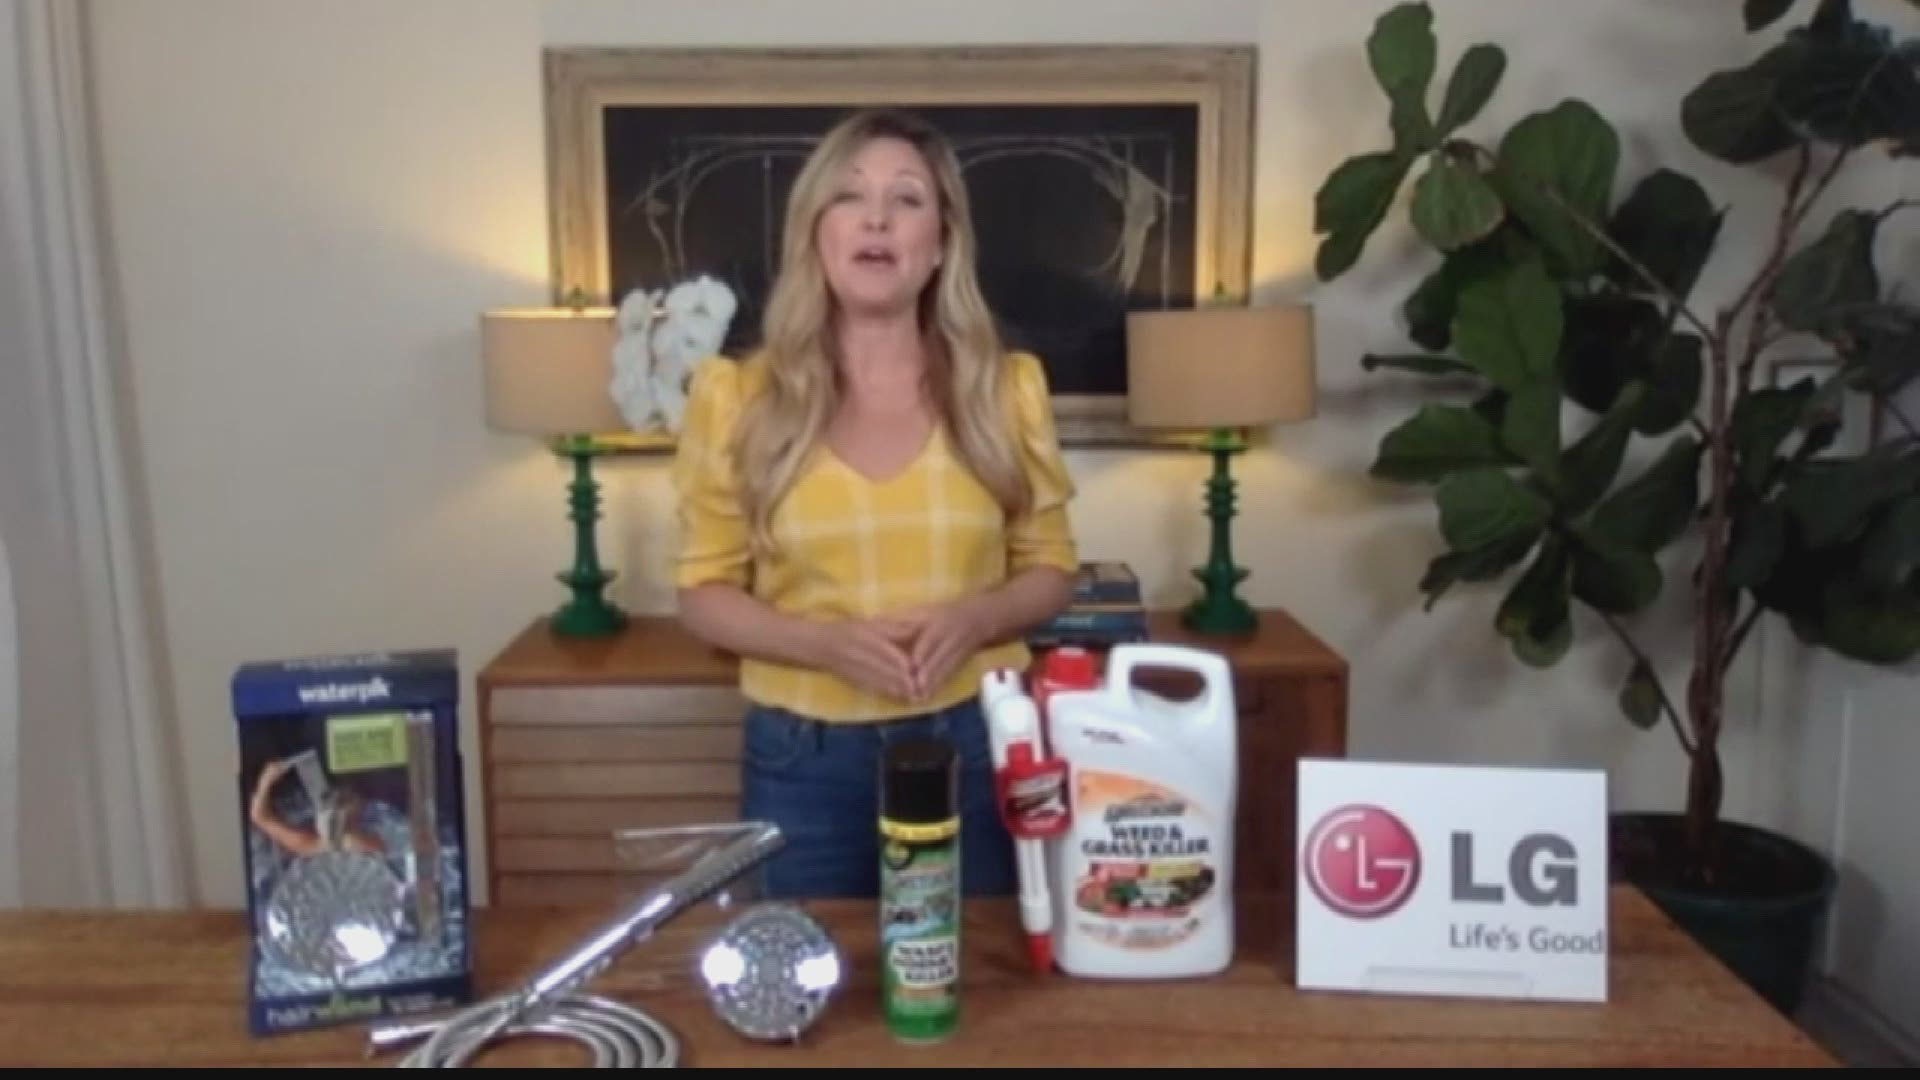 Lifestyle and design expert Kelly Edwards offers seasonal DIY household updates!